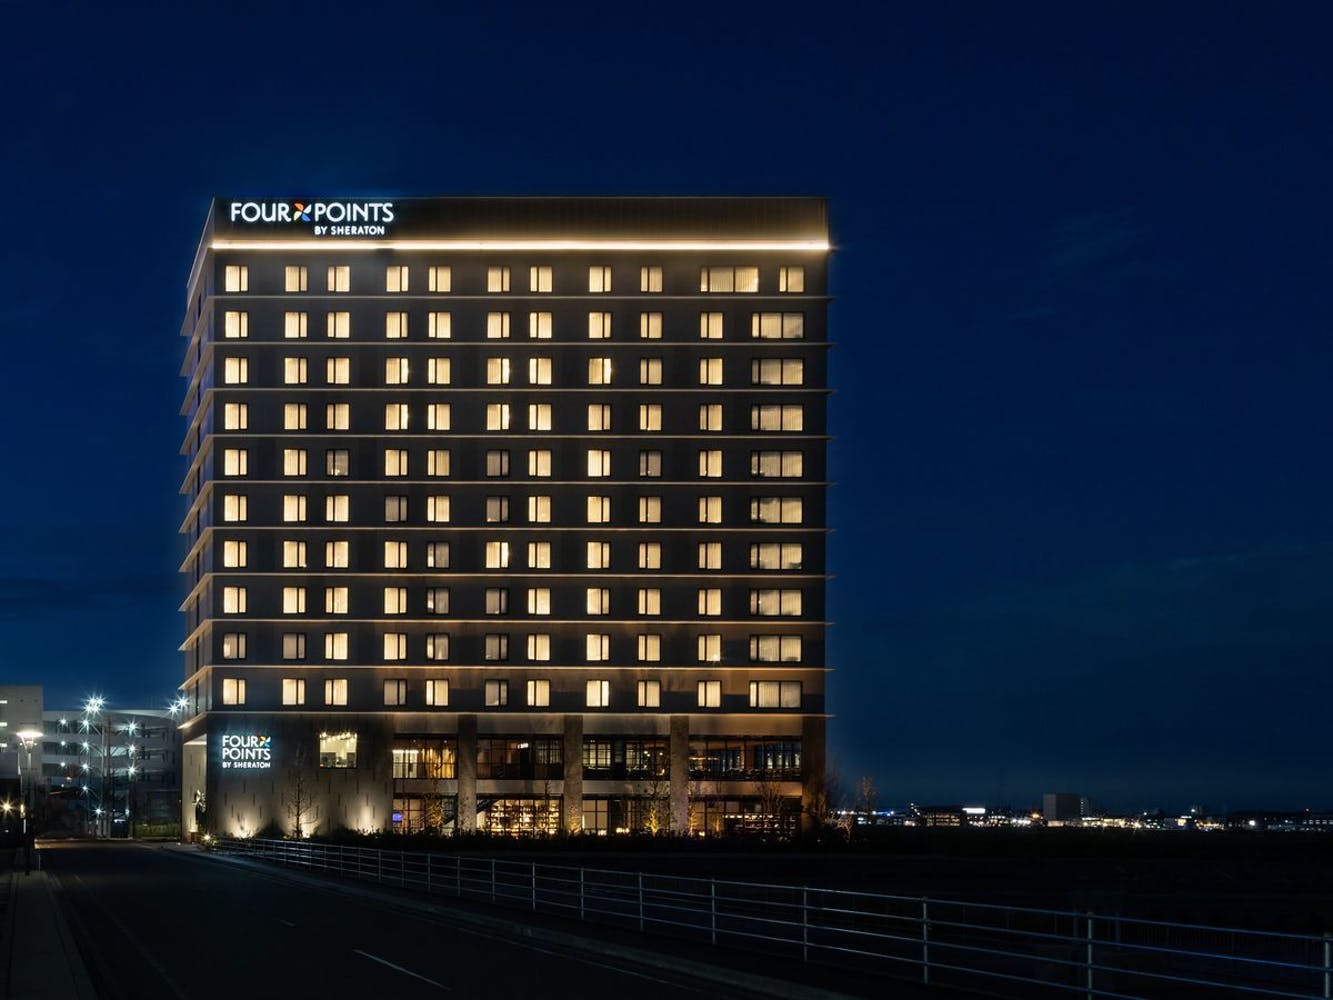 Four Points by Sheraton, Nagoya cited from Ikkyu 